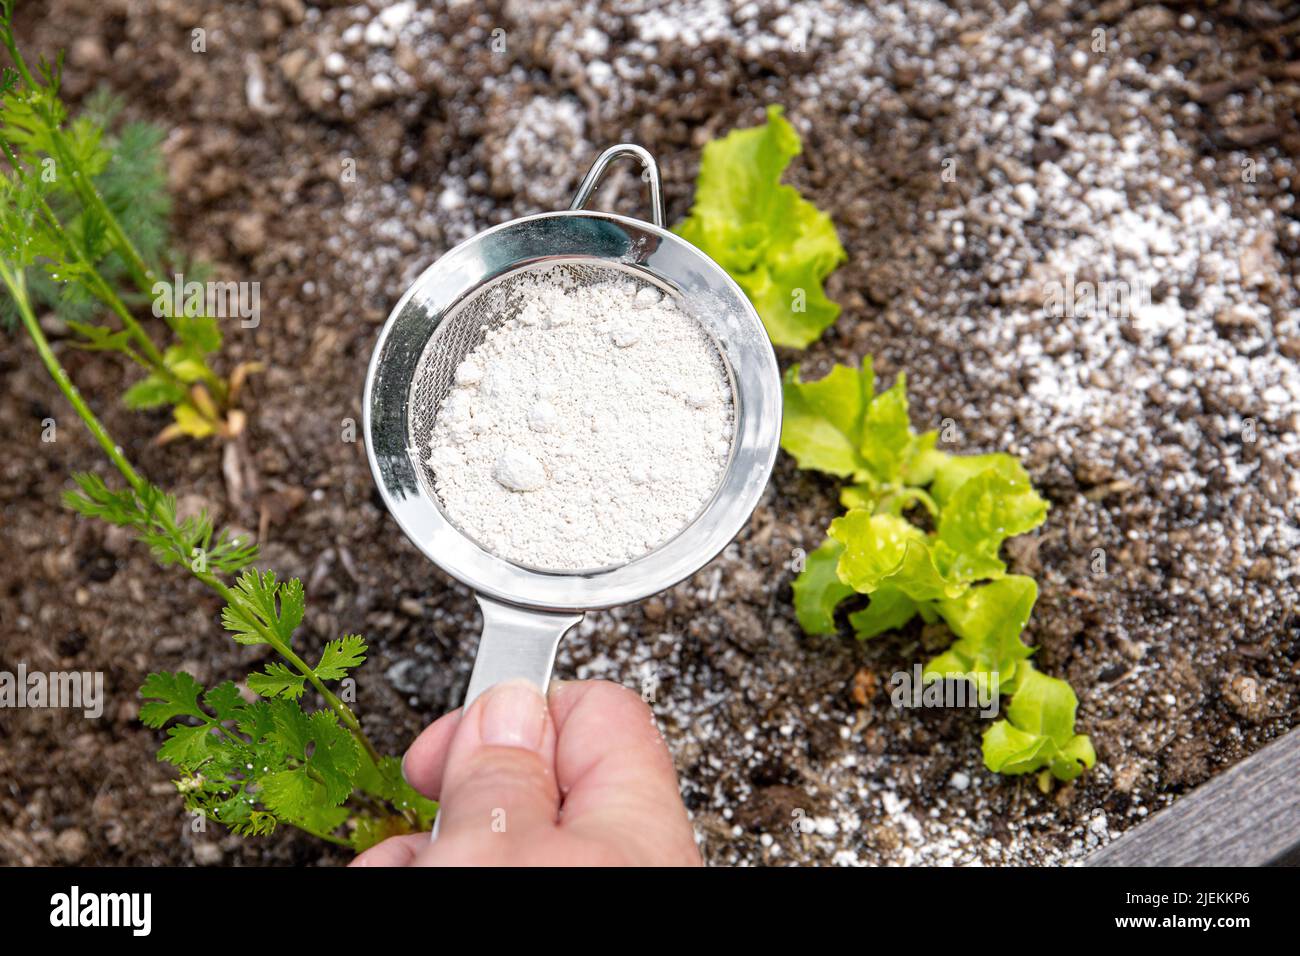 Diatomaceous earth( Kieselgur) powder in jar for non-toxic organic insect repellent. Using diatomite in garden concept. Stock Photo